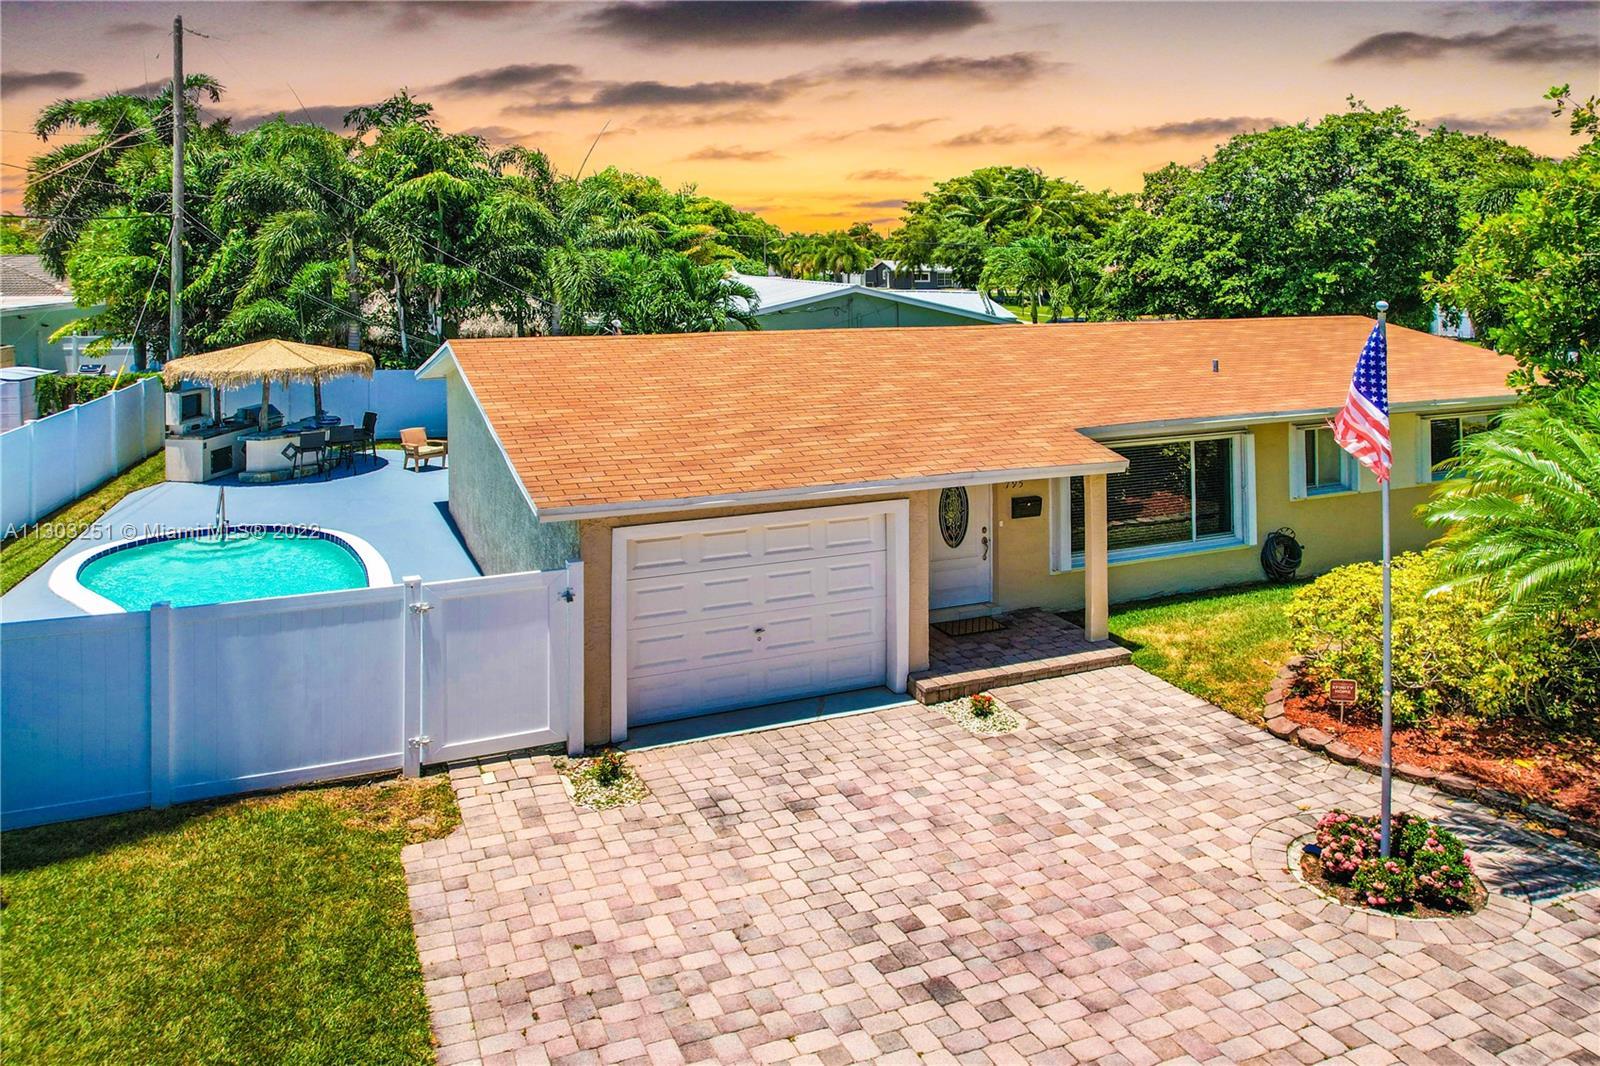 Deerfield Beach & Lighthouse Point living at its best! 3 Bedroom 2 Bath home just 4 mins from Beach 